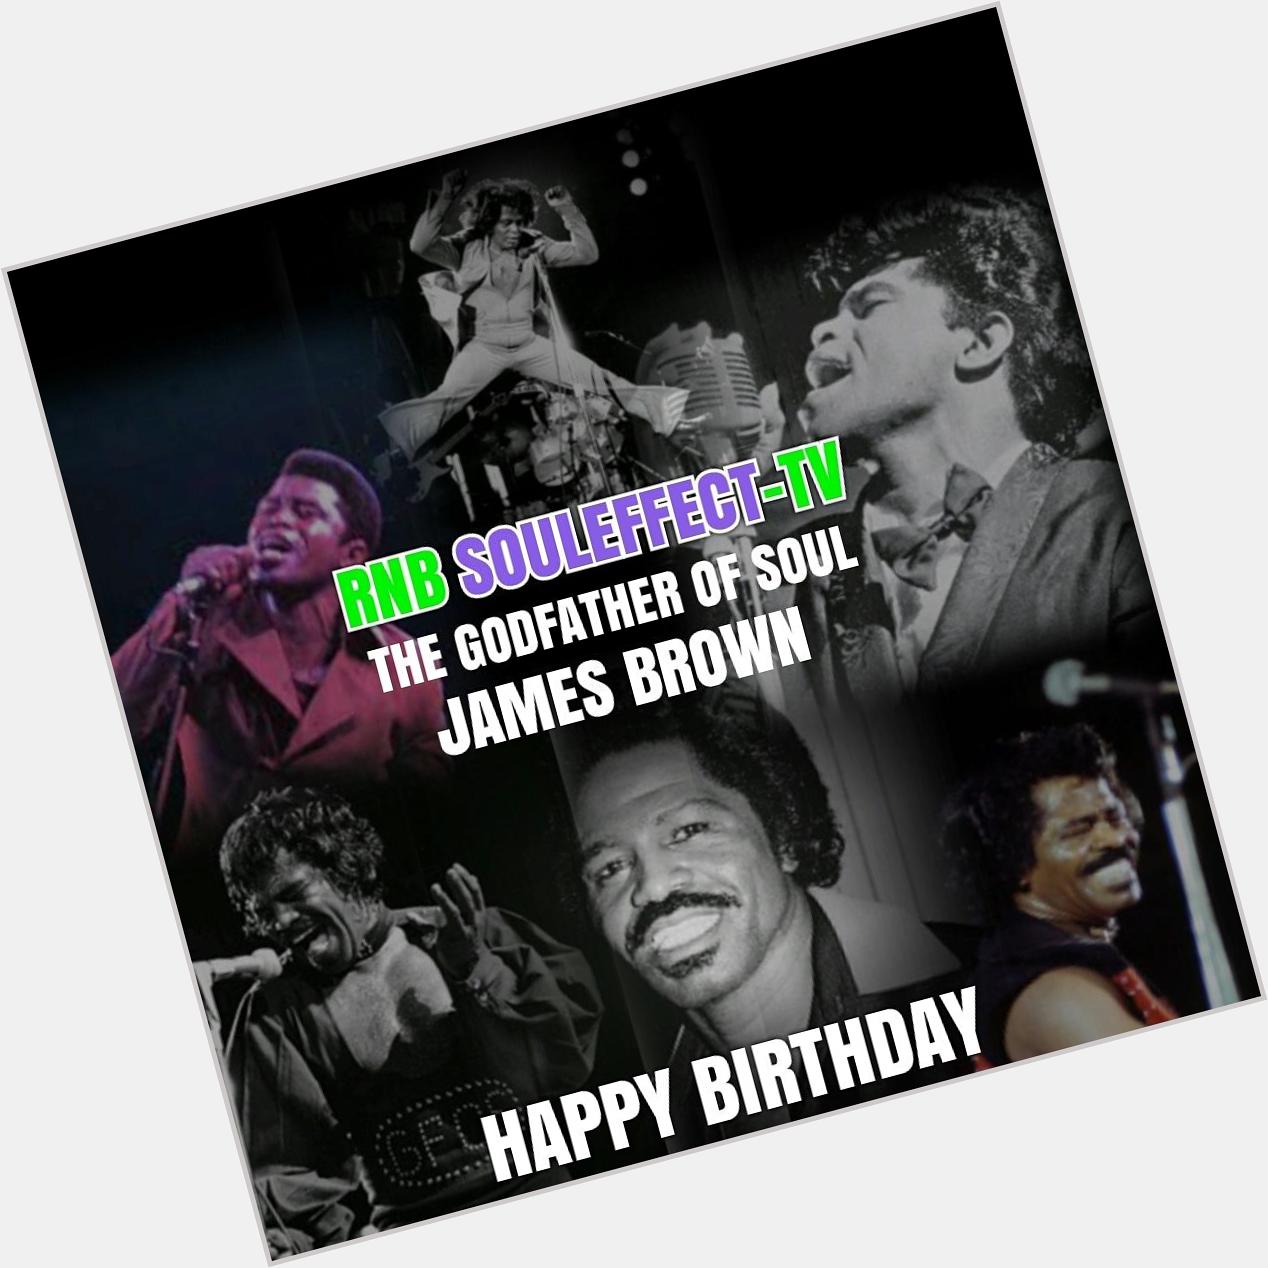 Happy birthday to the godfather of soul James Brown     